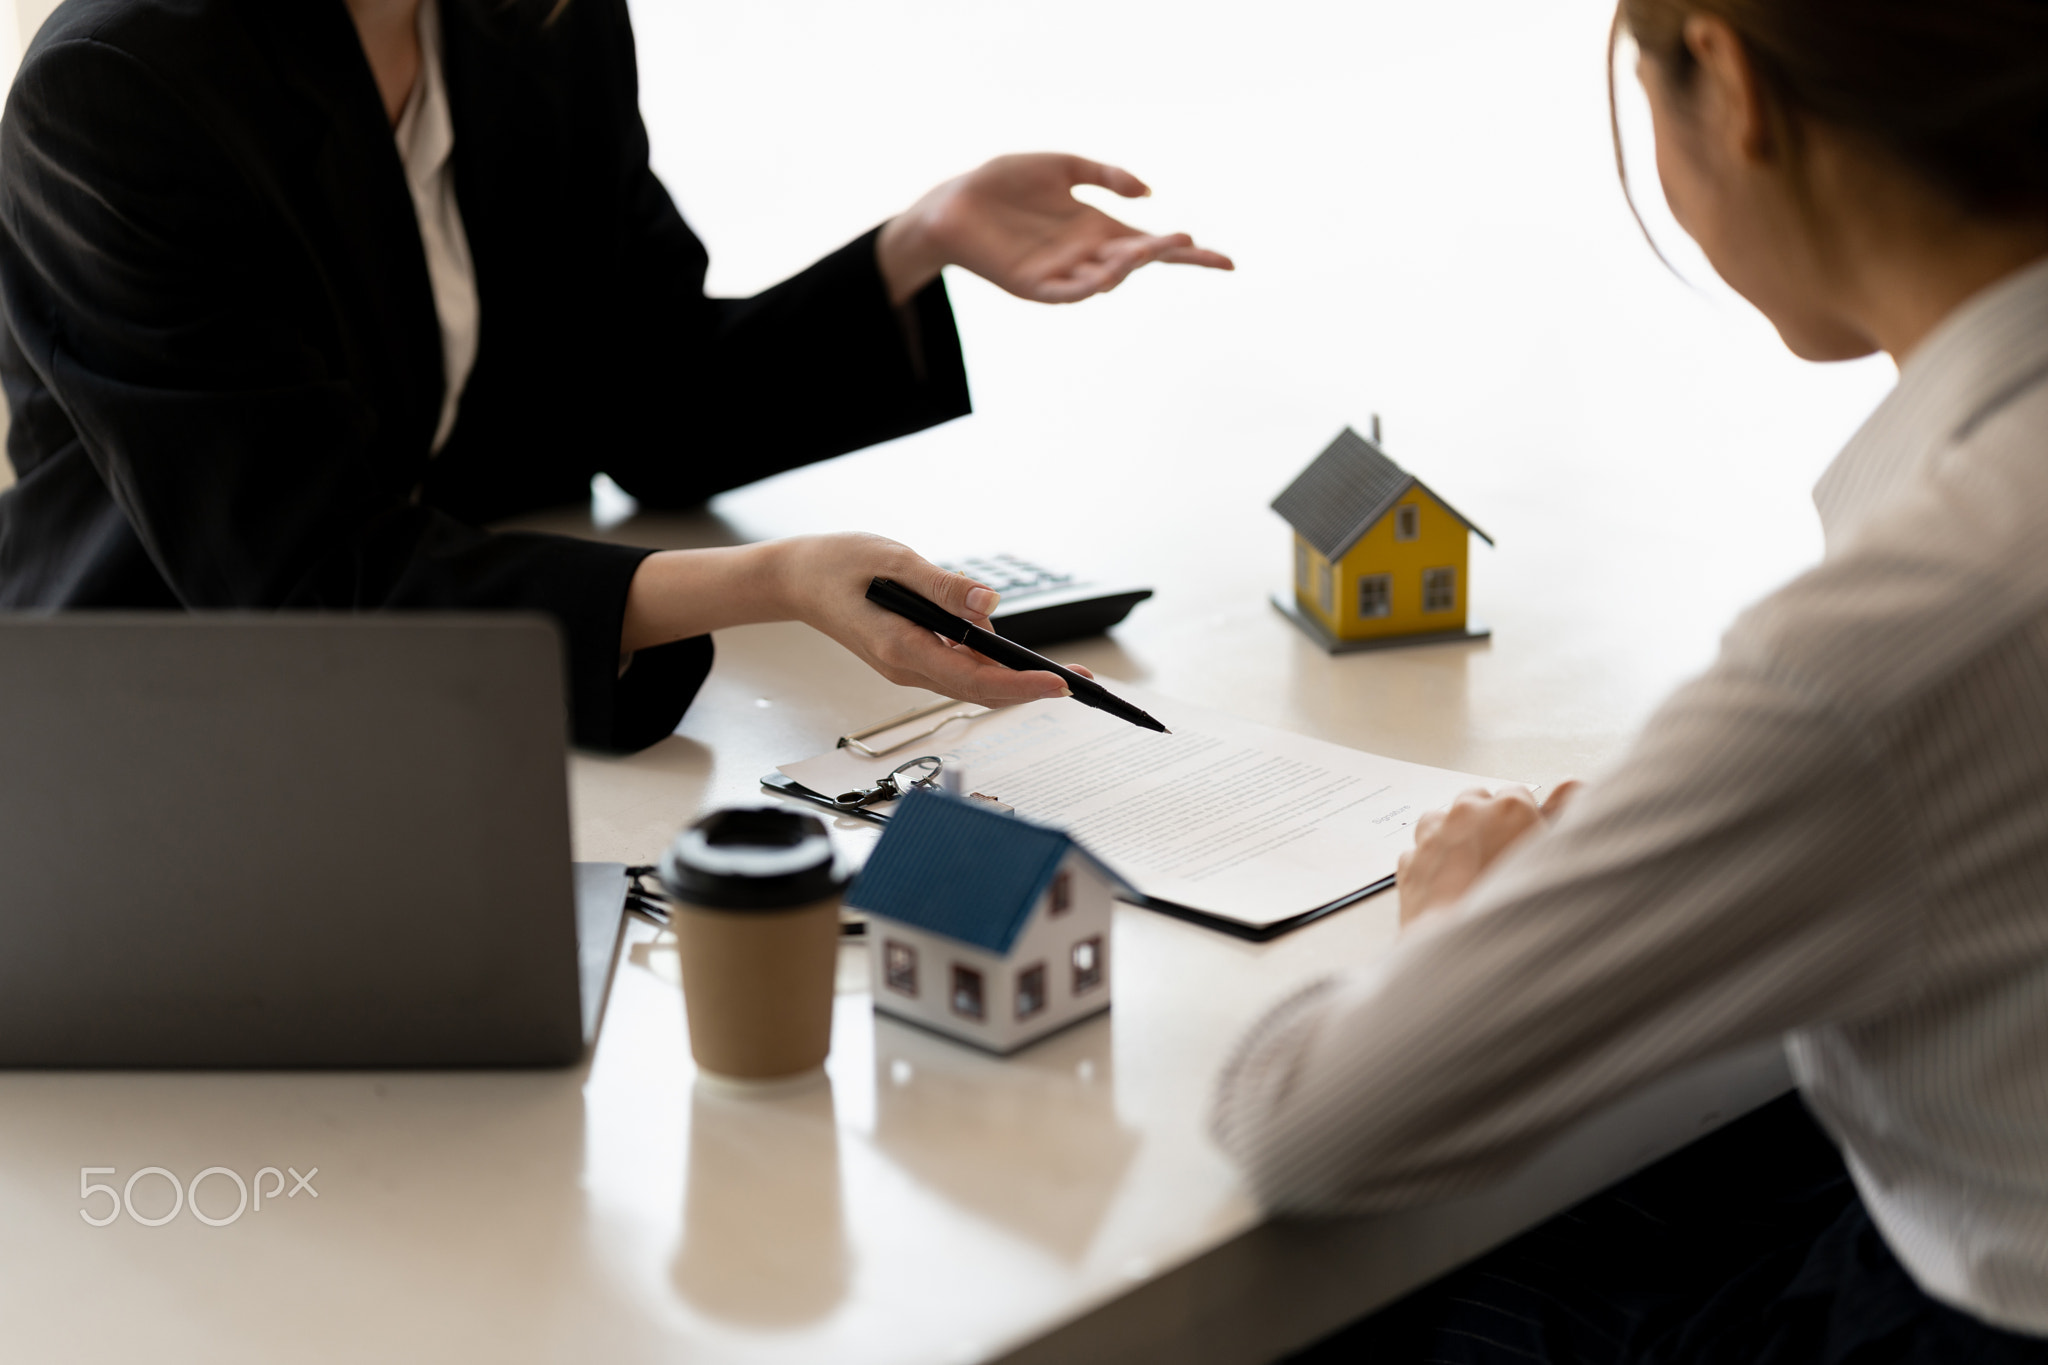 Real estate agents agree to buy a home and give keys to clients at